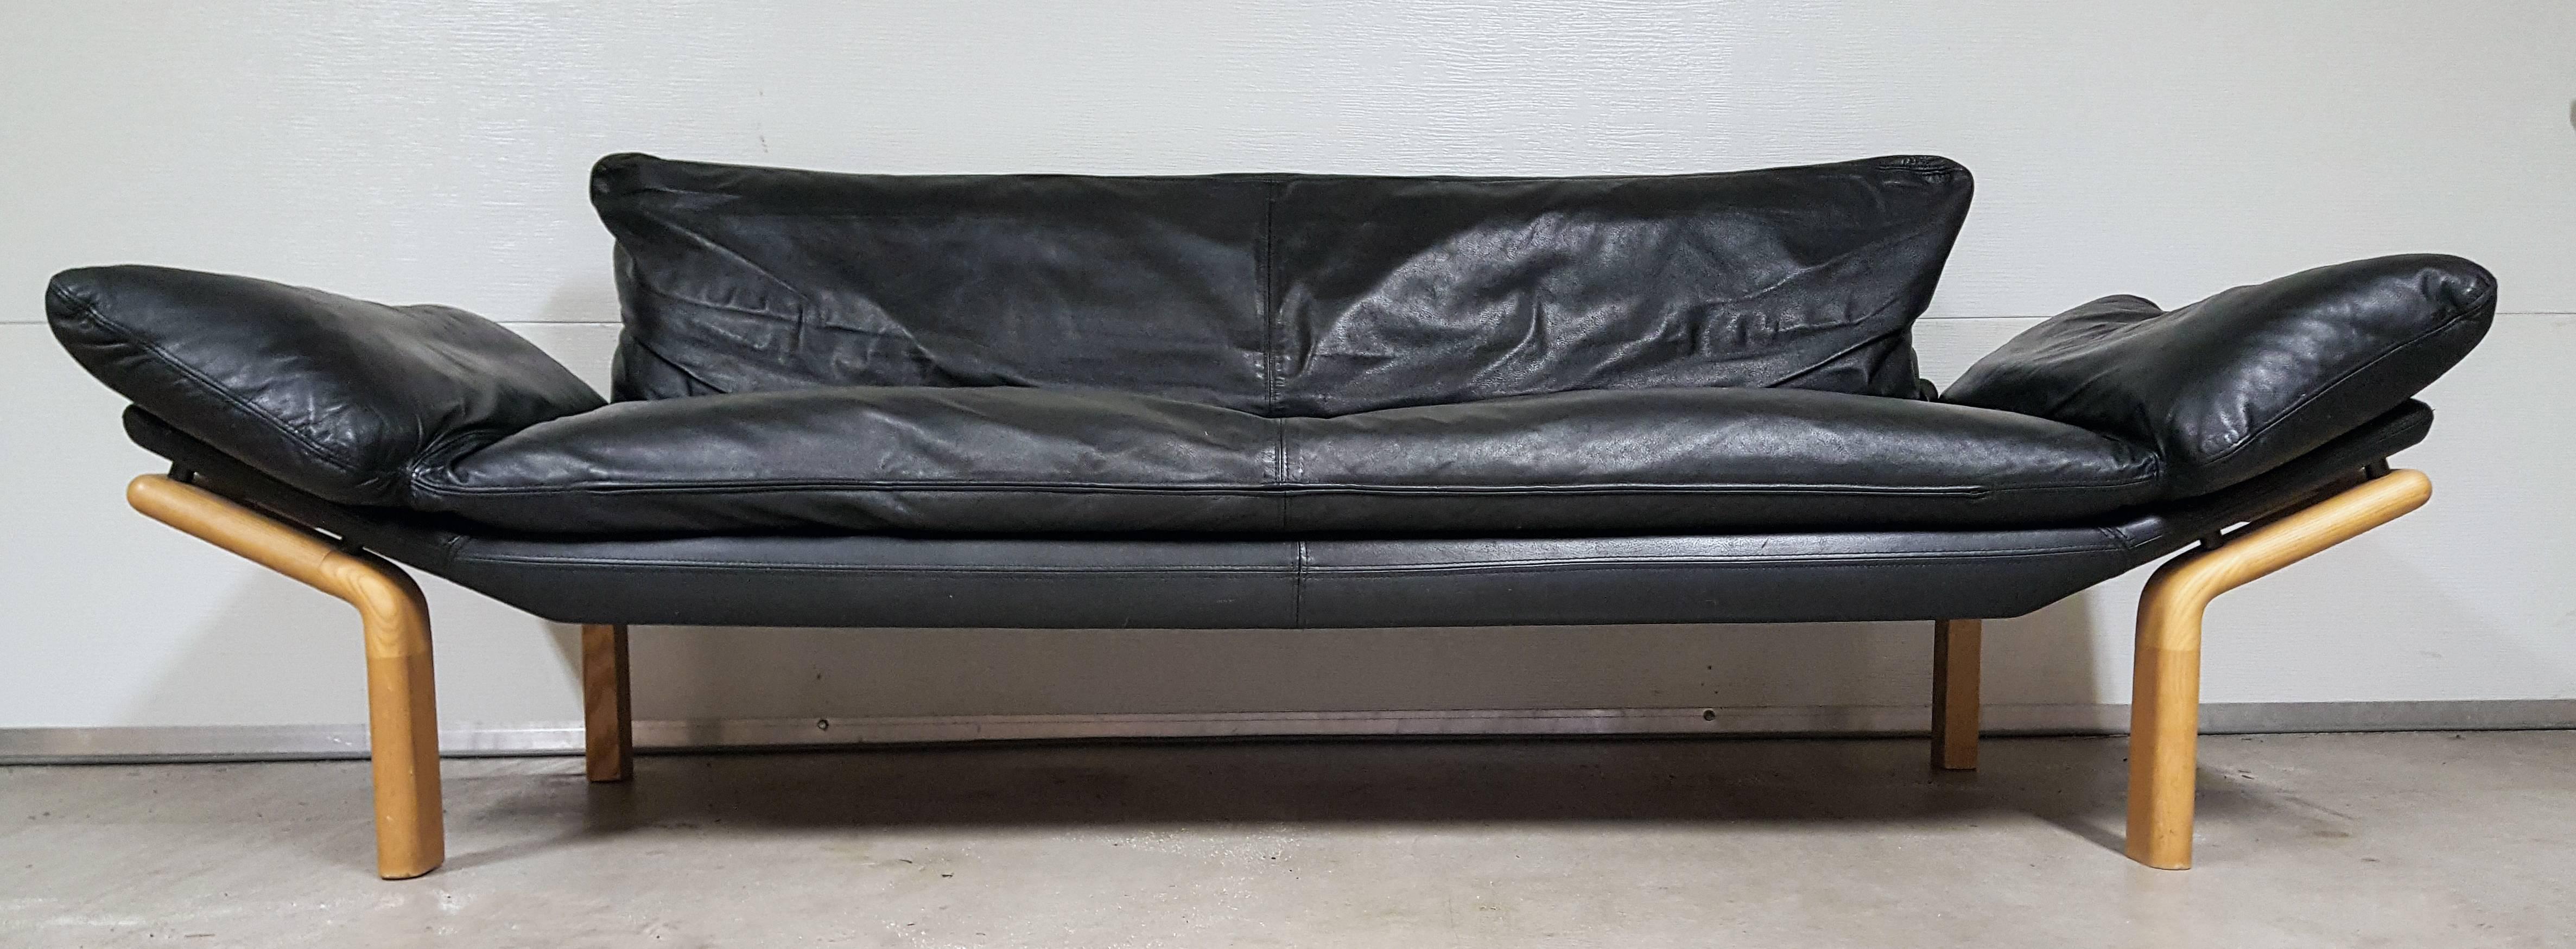 A stunning sofa by Komfort, Denmark. The sofa is upholstered in a supple black leather and is in great vintage condition. The sofa features a wrapped and 